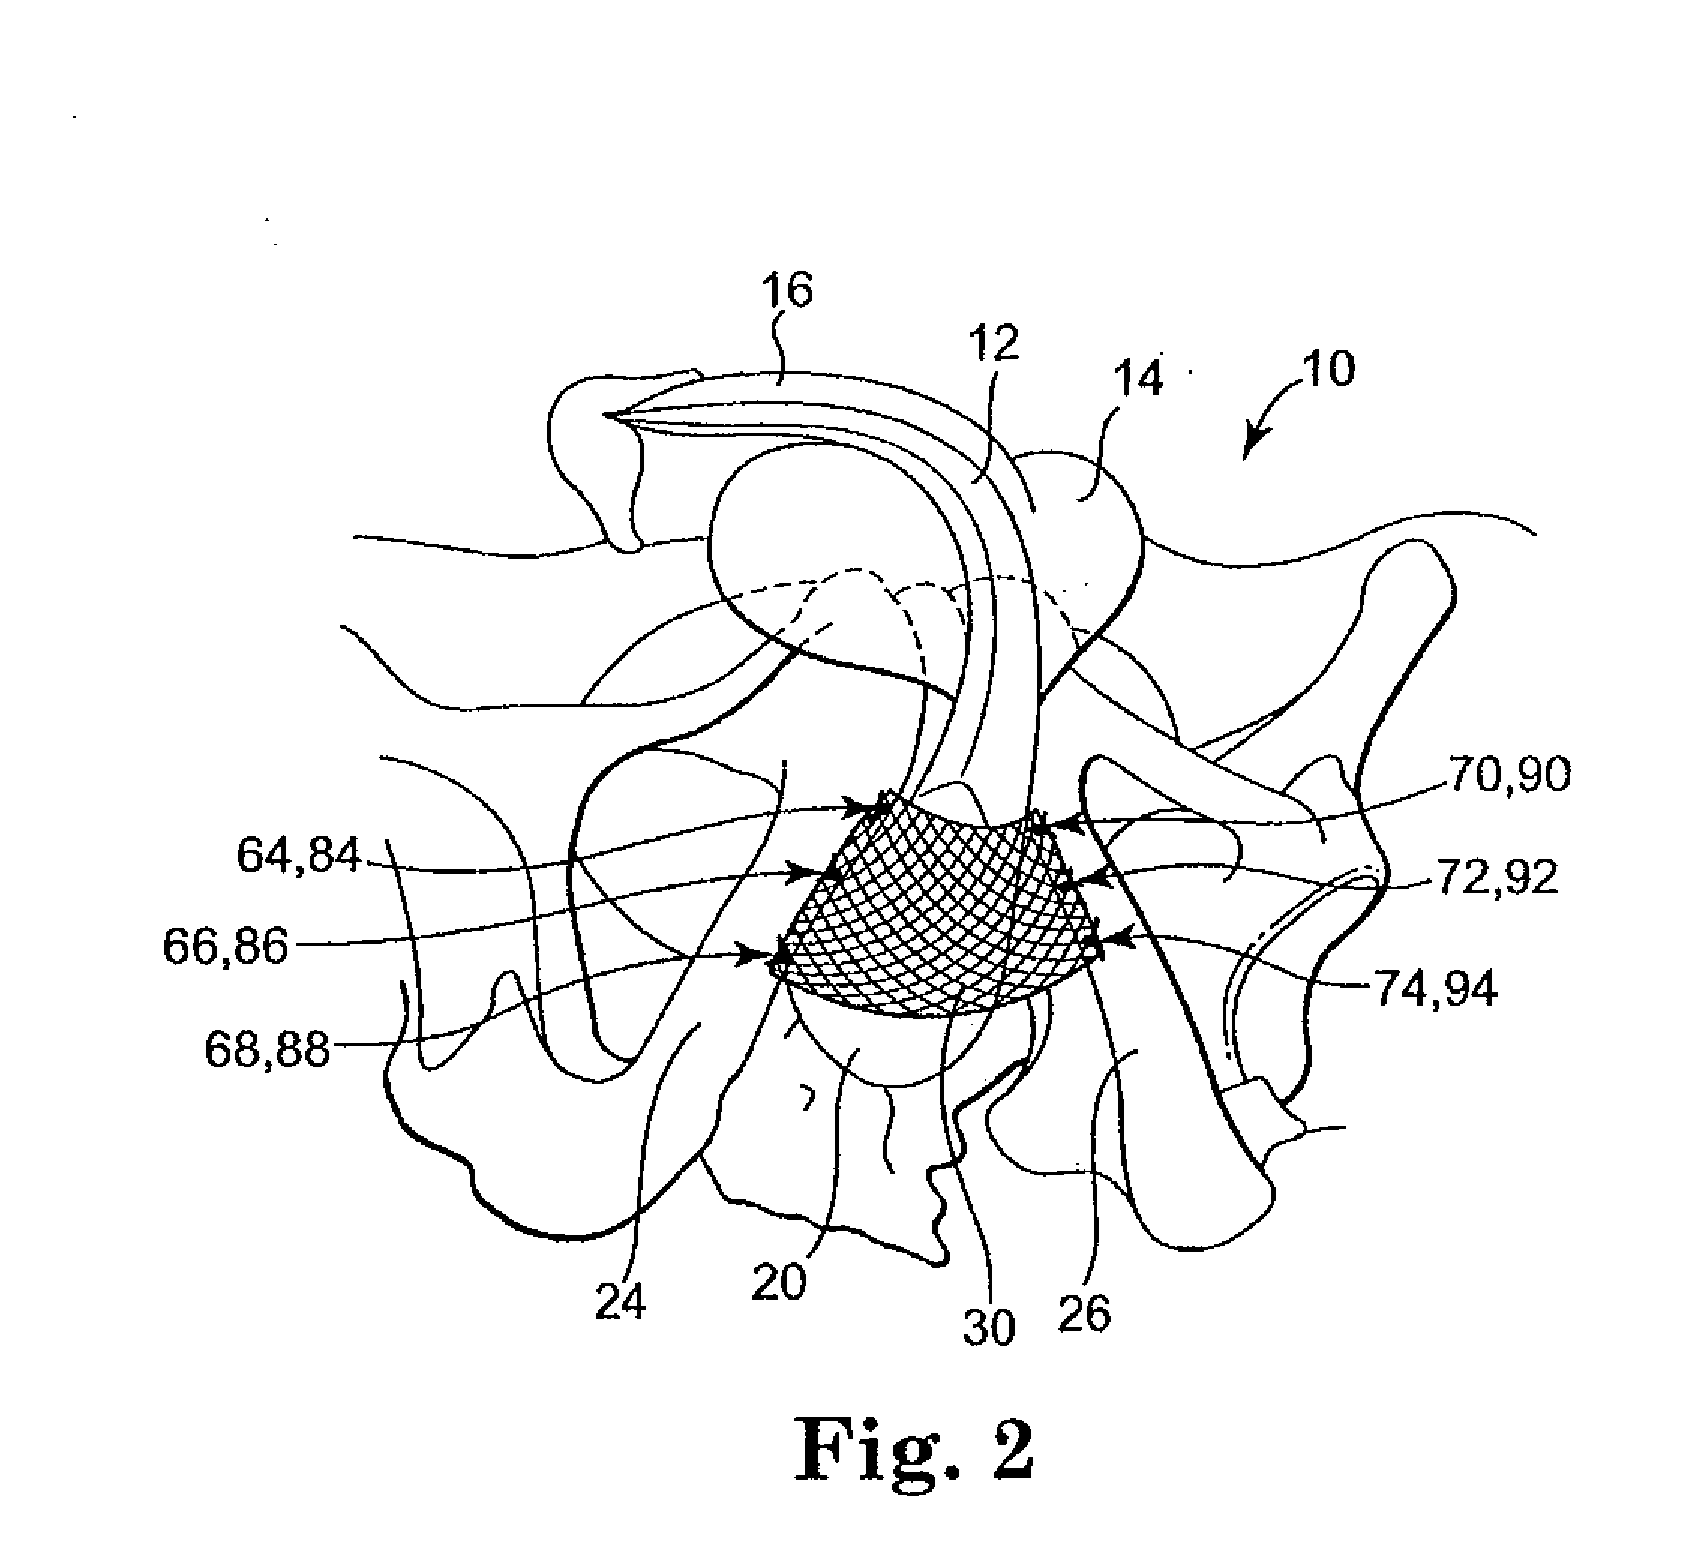 Methods and apparatus for securing and tensioning a urethral sling to pubic bone